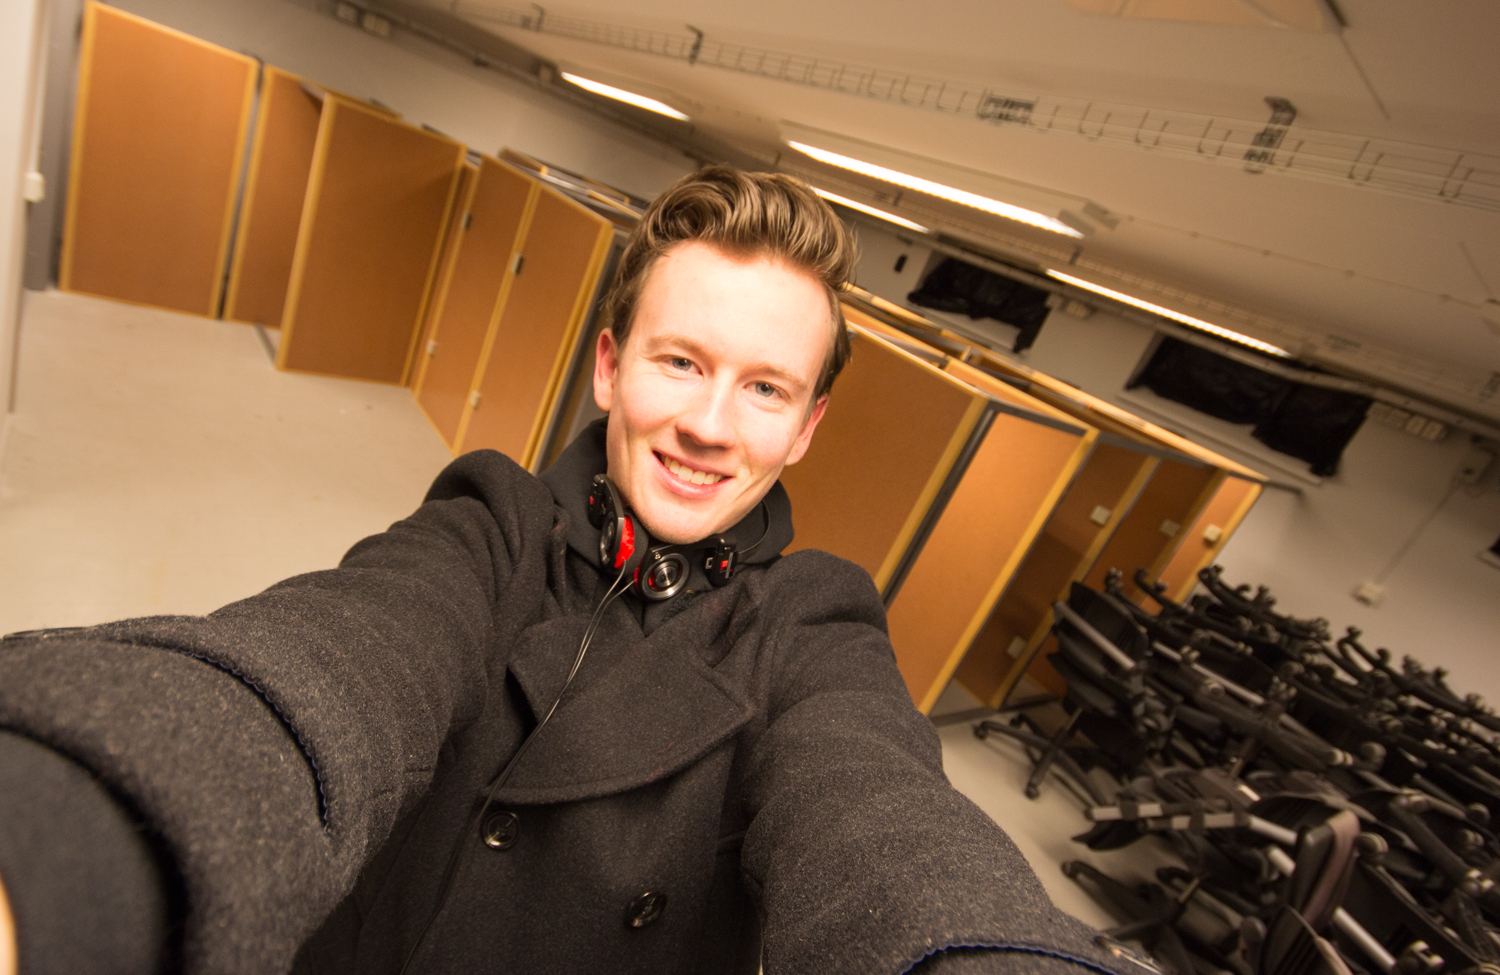 Daniel visiting the 2017 CESA room at Chalmers.